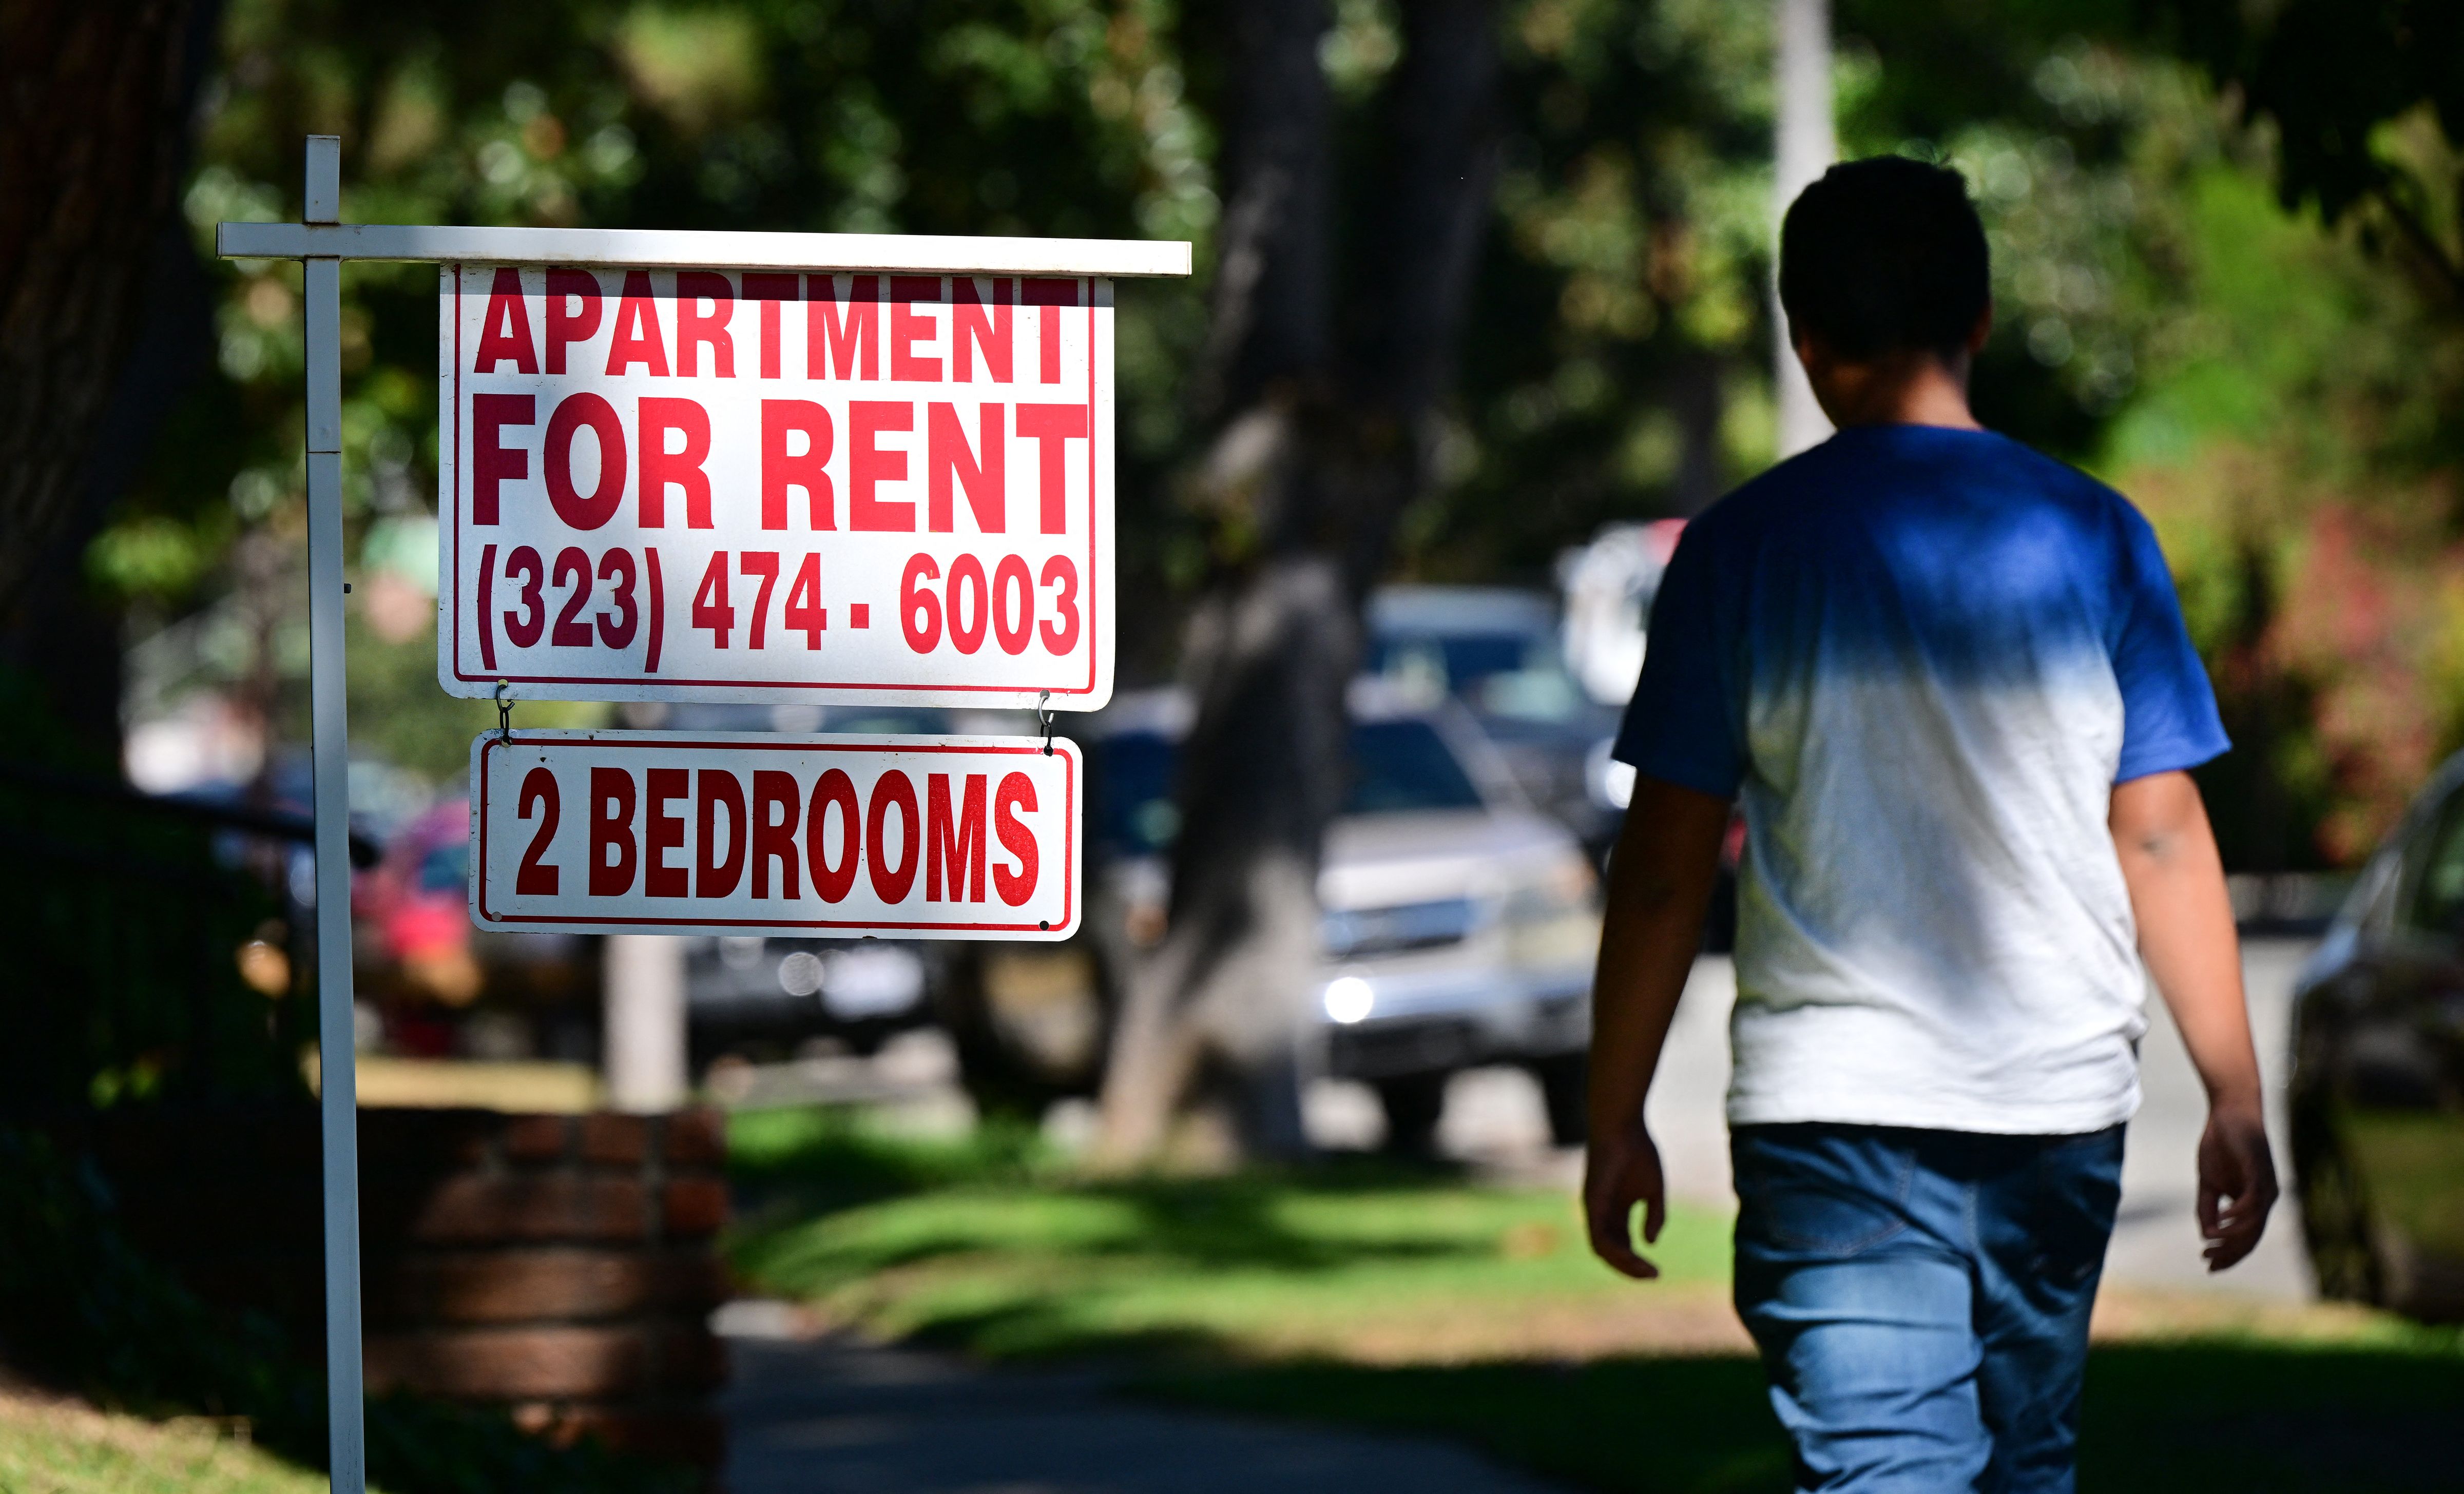 A person walks by a sign advertising a two-bedroom apartment for rent.